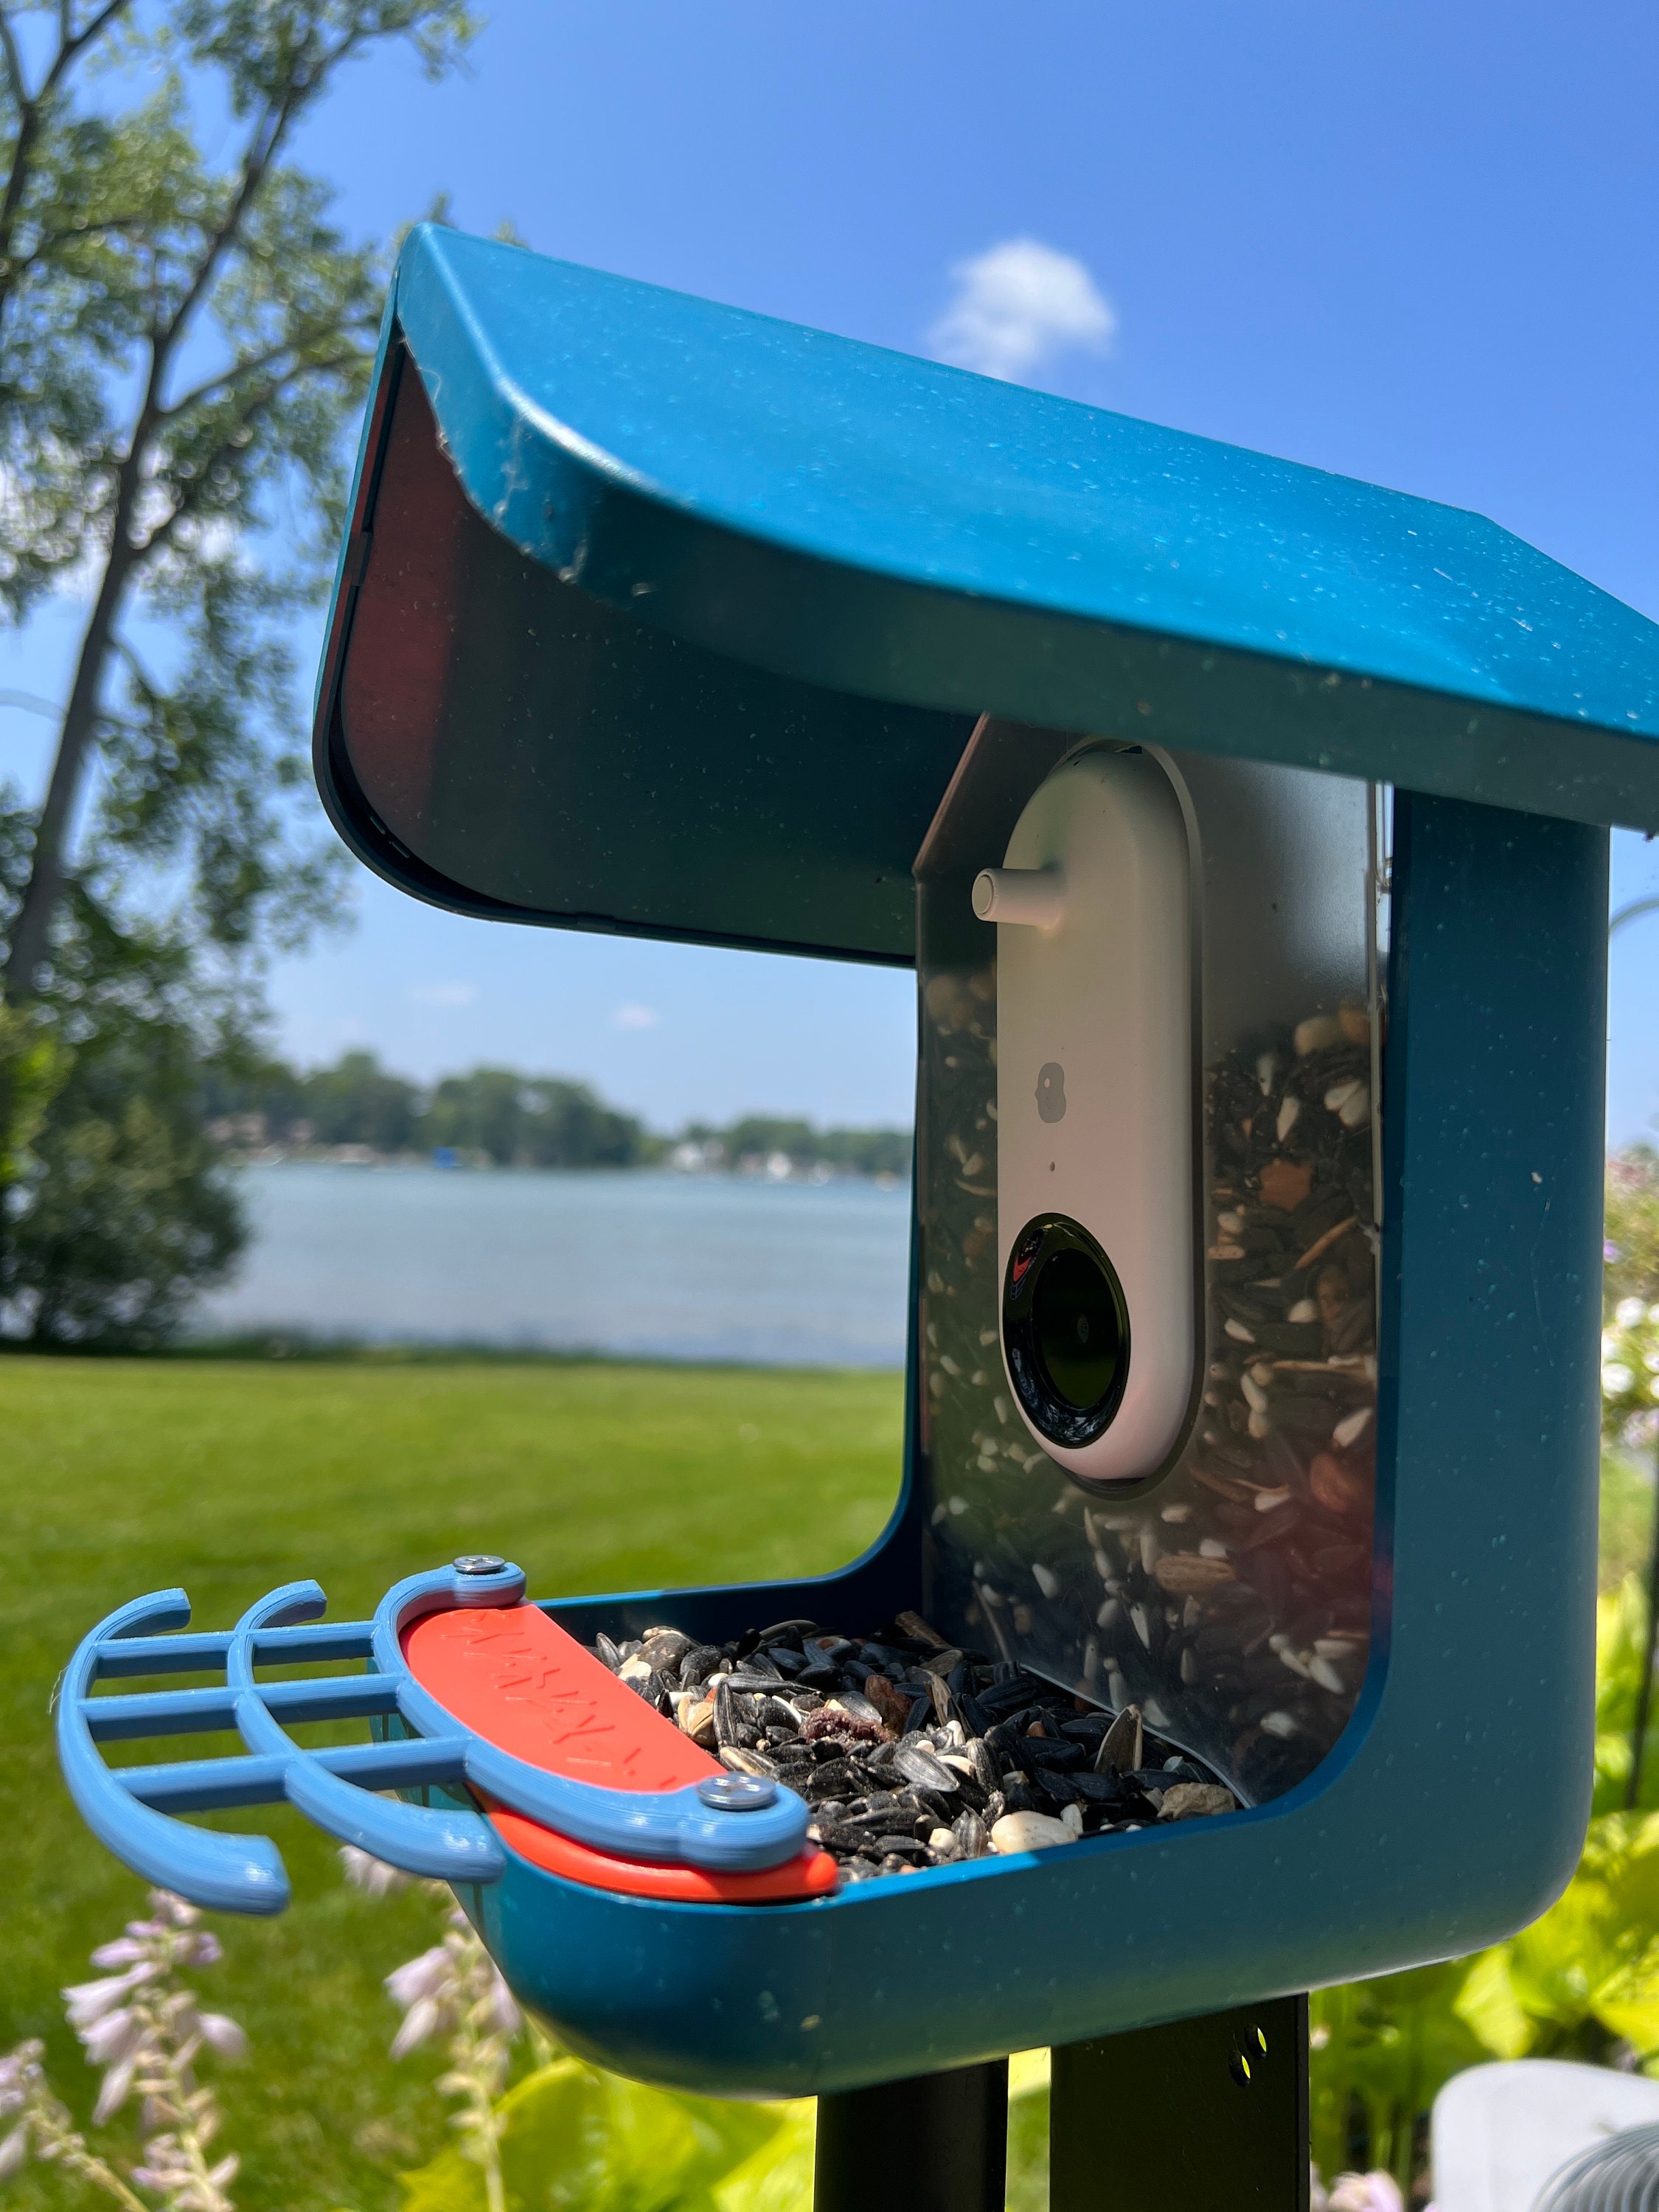 Perch for Bird Buddy Smart Bird Feeder,Accessories Compatible with